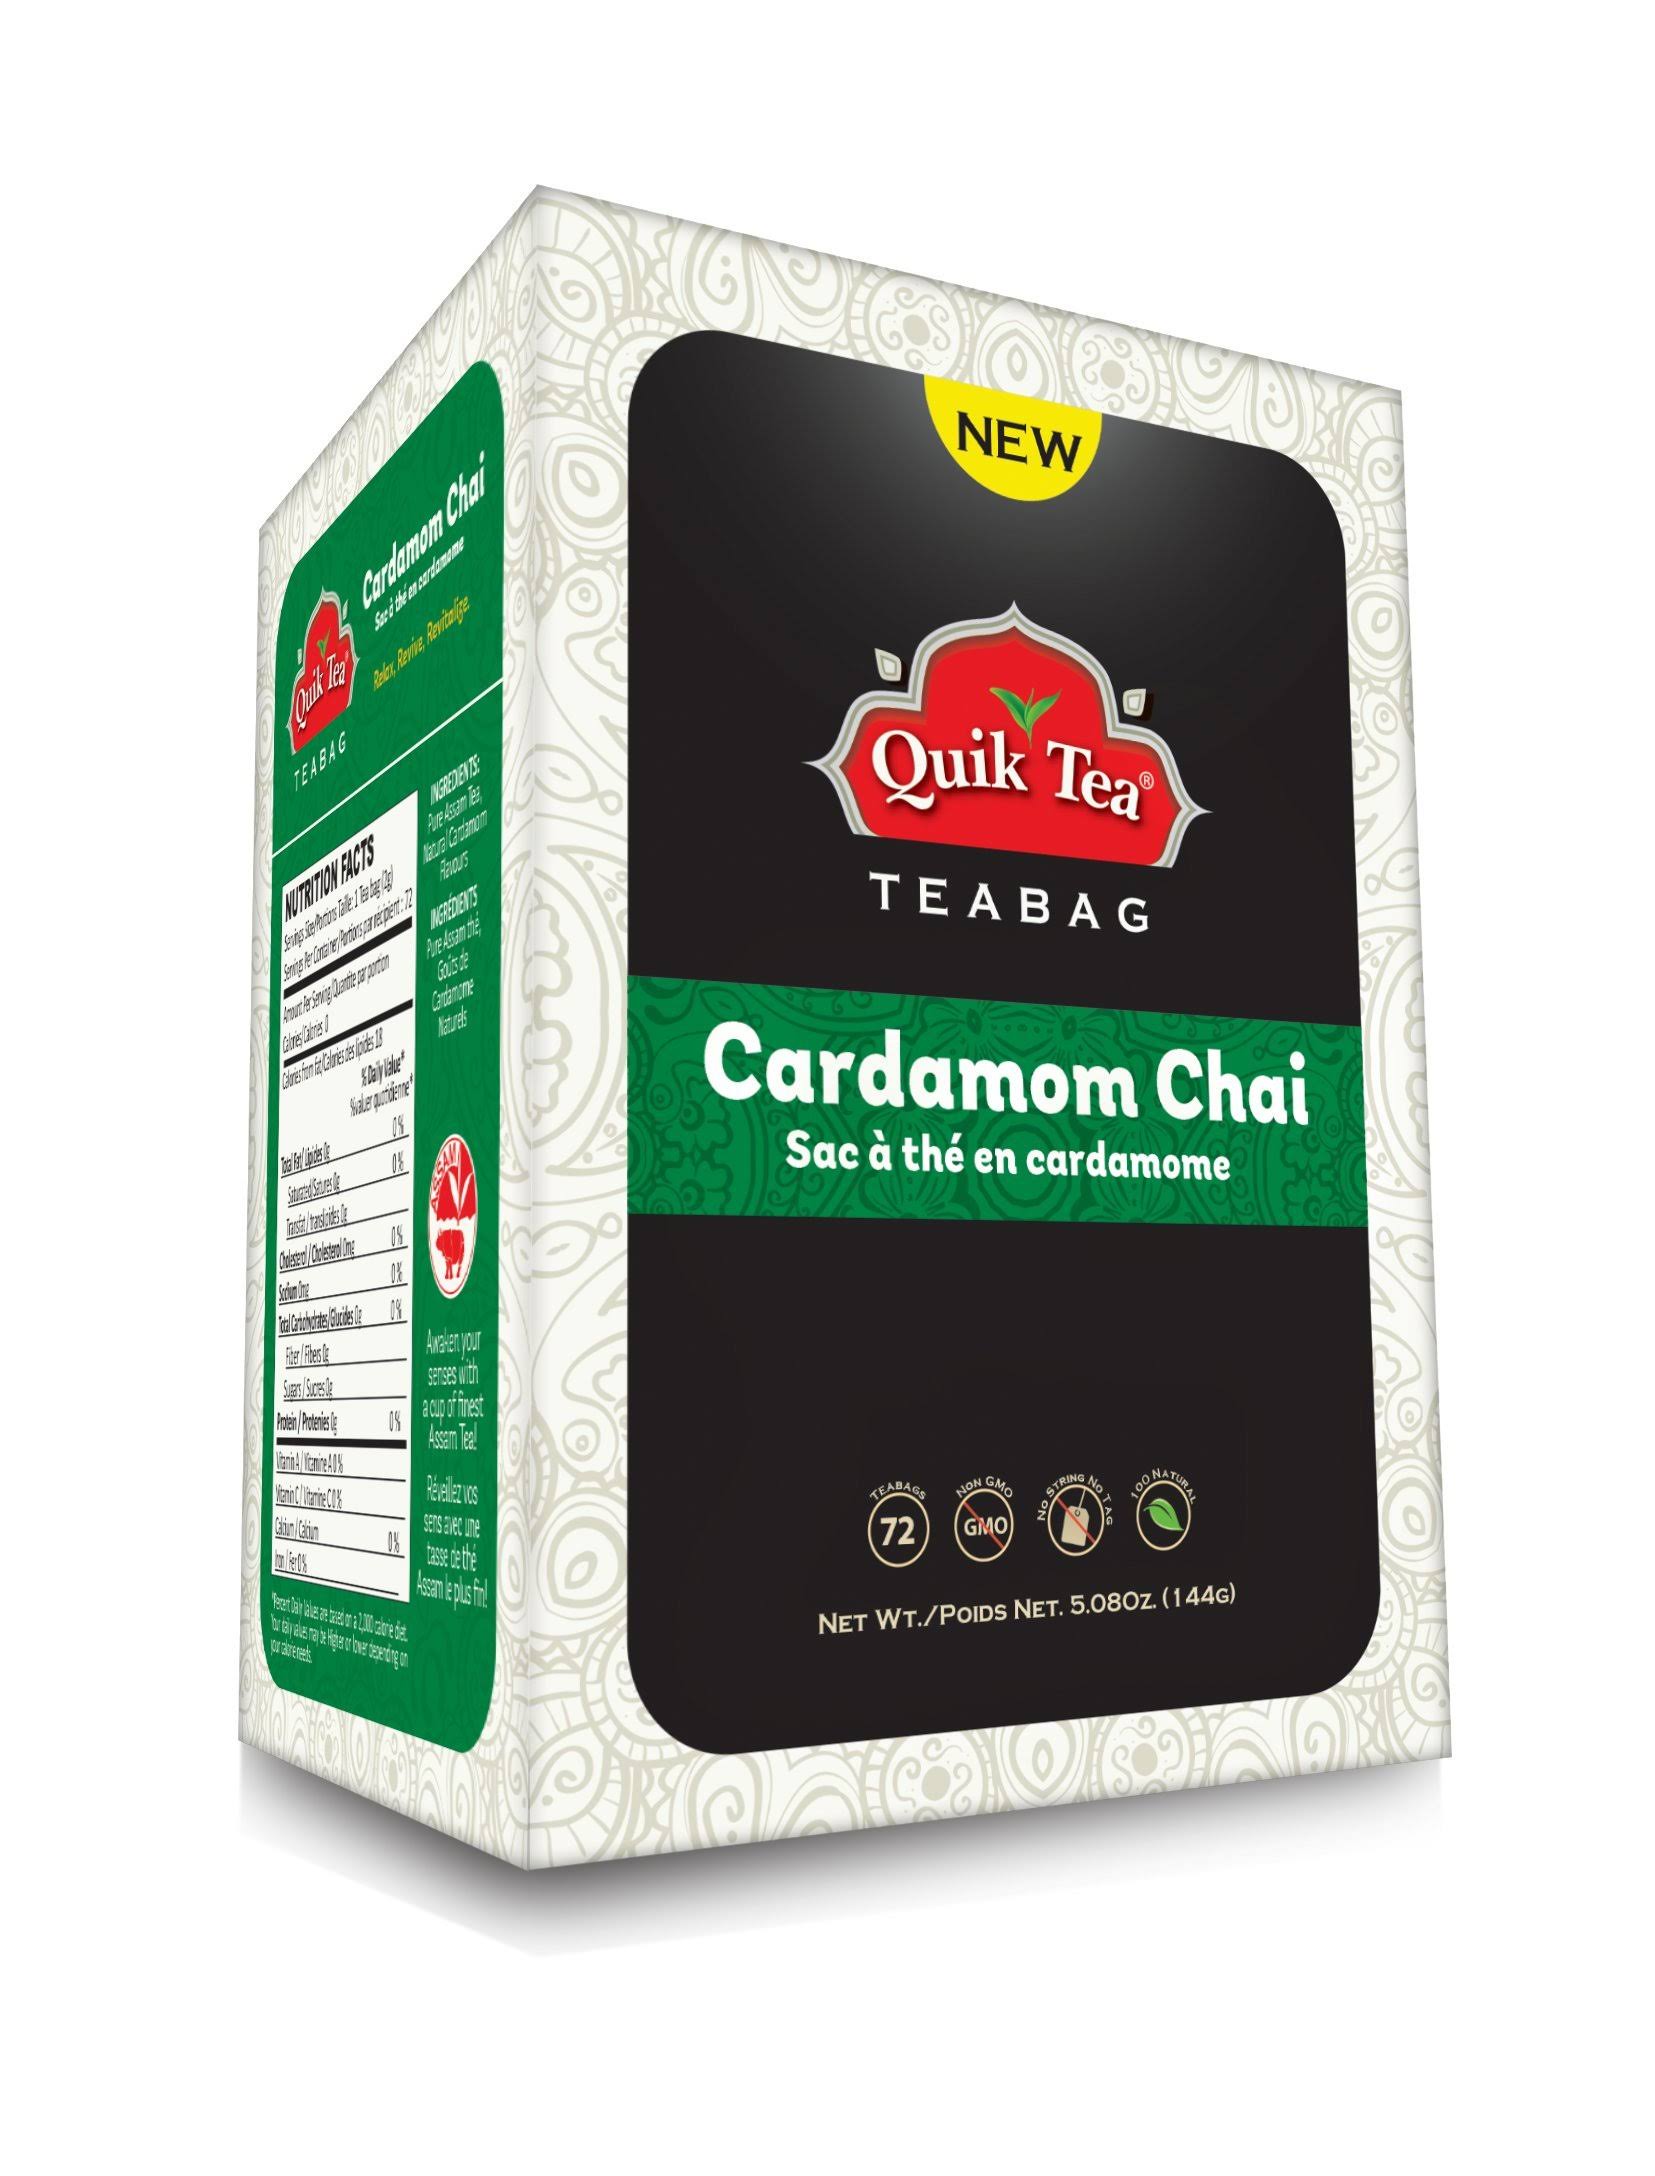 QuikTea Cardamom Chai Tea Bags - 72 Count Single Box - Packaging May Vary - All Natural Preservative Free Tea Bags From Assam